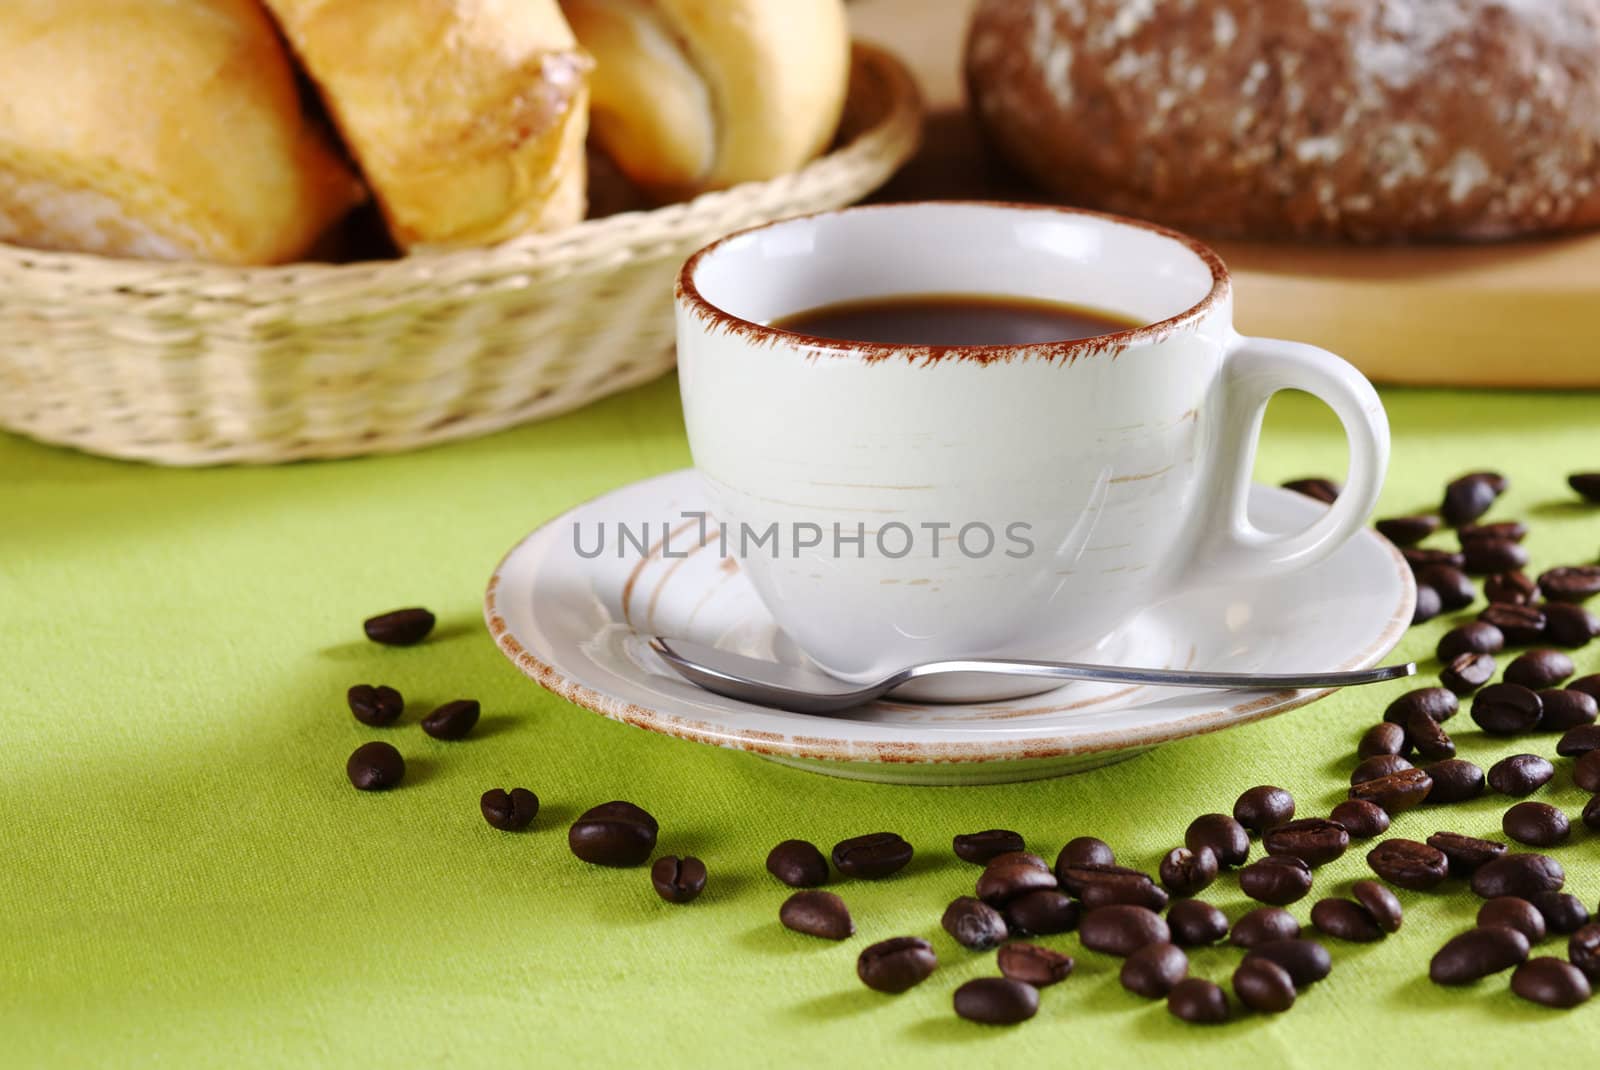 Coffee in cup surrounded by many coffee beans on green tablecloth with brown bread and rolls in the background (Selective Focus, Focus on the cup)